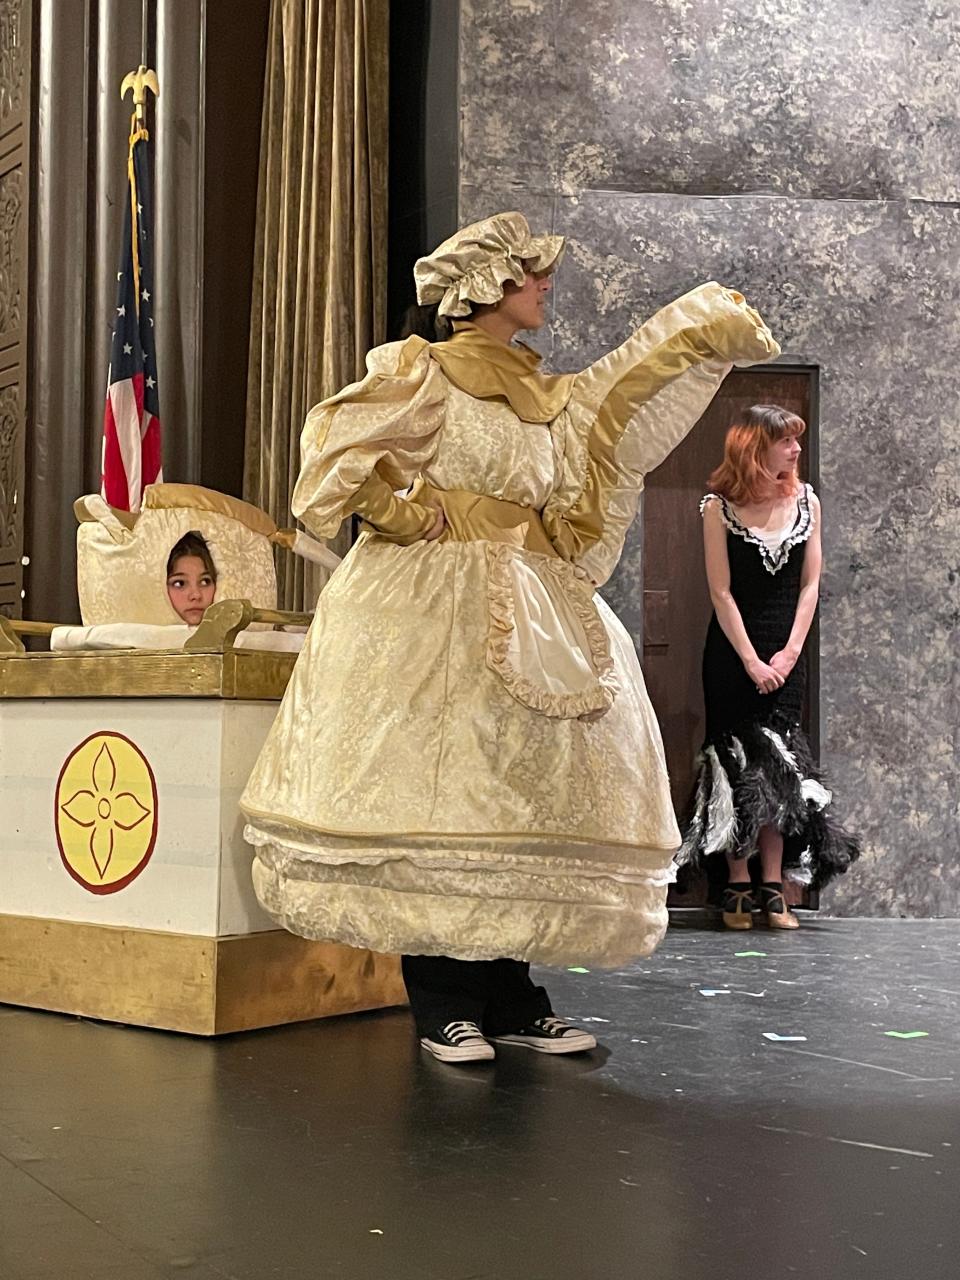 Chip, Mrs. Potts and Babette (Gabrielle Berkman, Julia Fret and Artemis Caporoso) rehearse a scene from "Beauty and the Beast," which plays at Tuckahoe Middle High School March 9-11. Performances at 7:30 p.m., March 9, 10; 2 and 7:30 p.m., March 11. $15; $10 students, seniors. At the door. Details at https://tinyurl.com/TMSTHSBeautyBeast2023